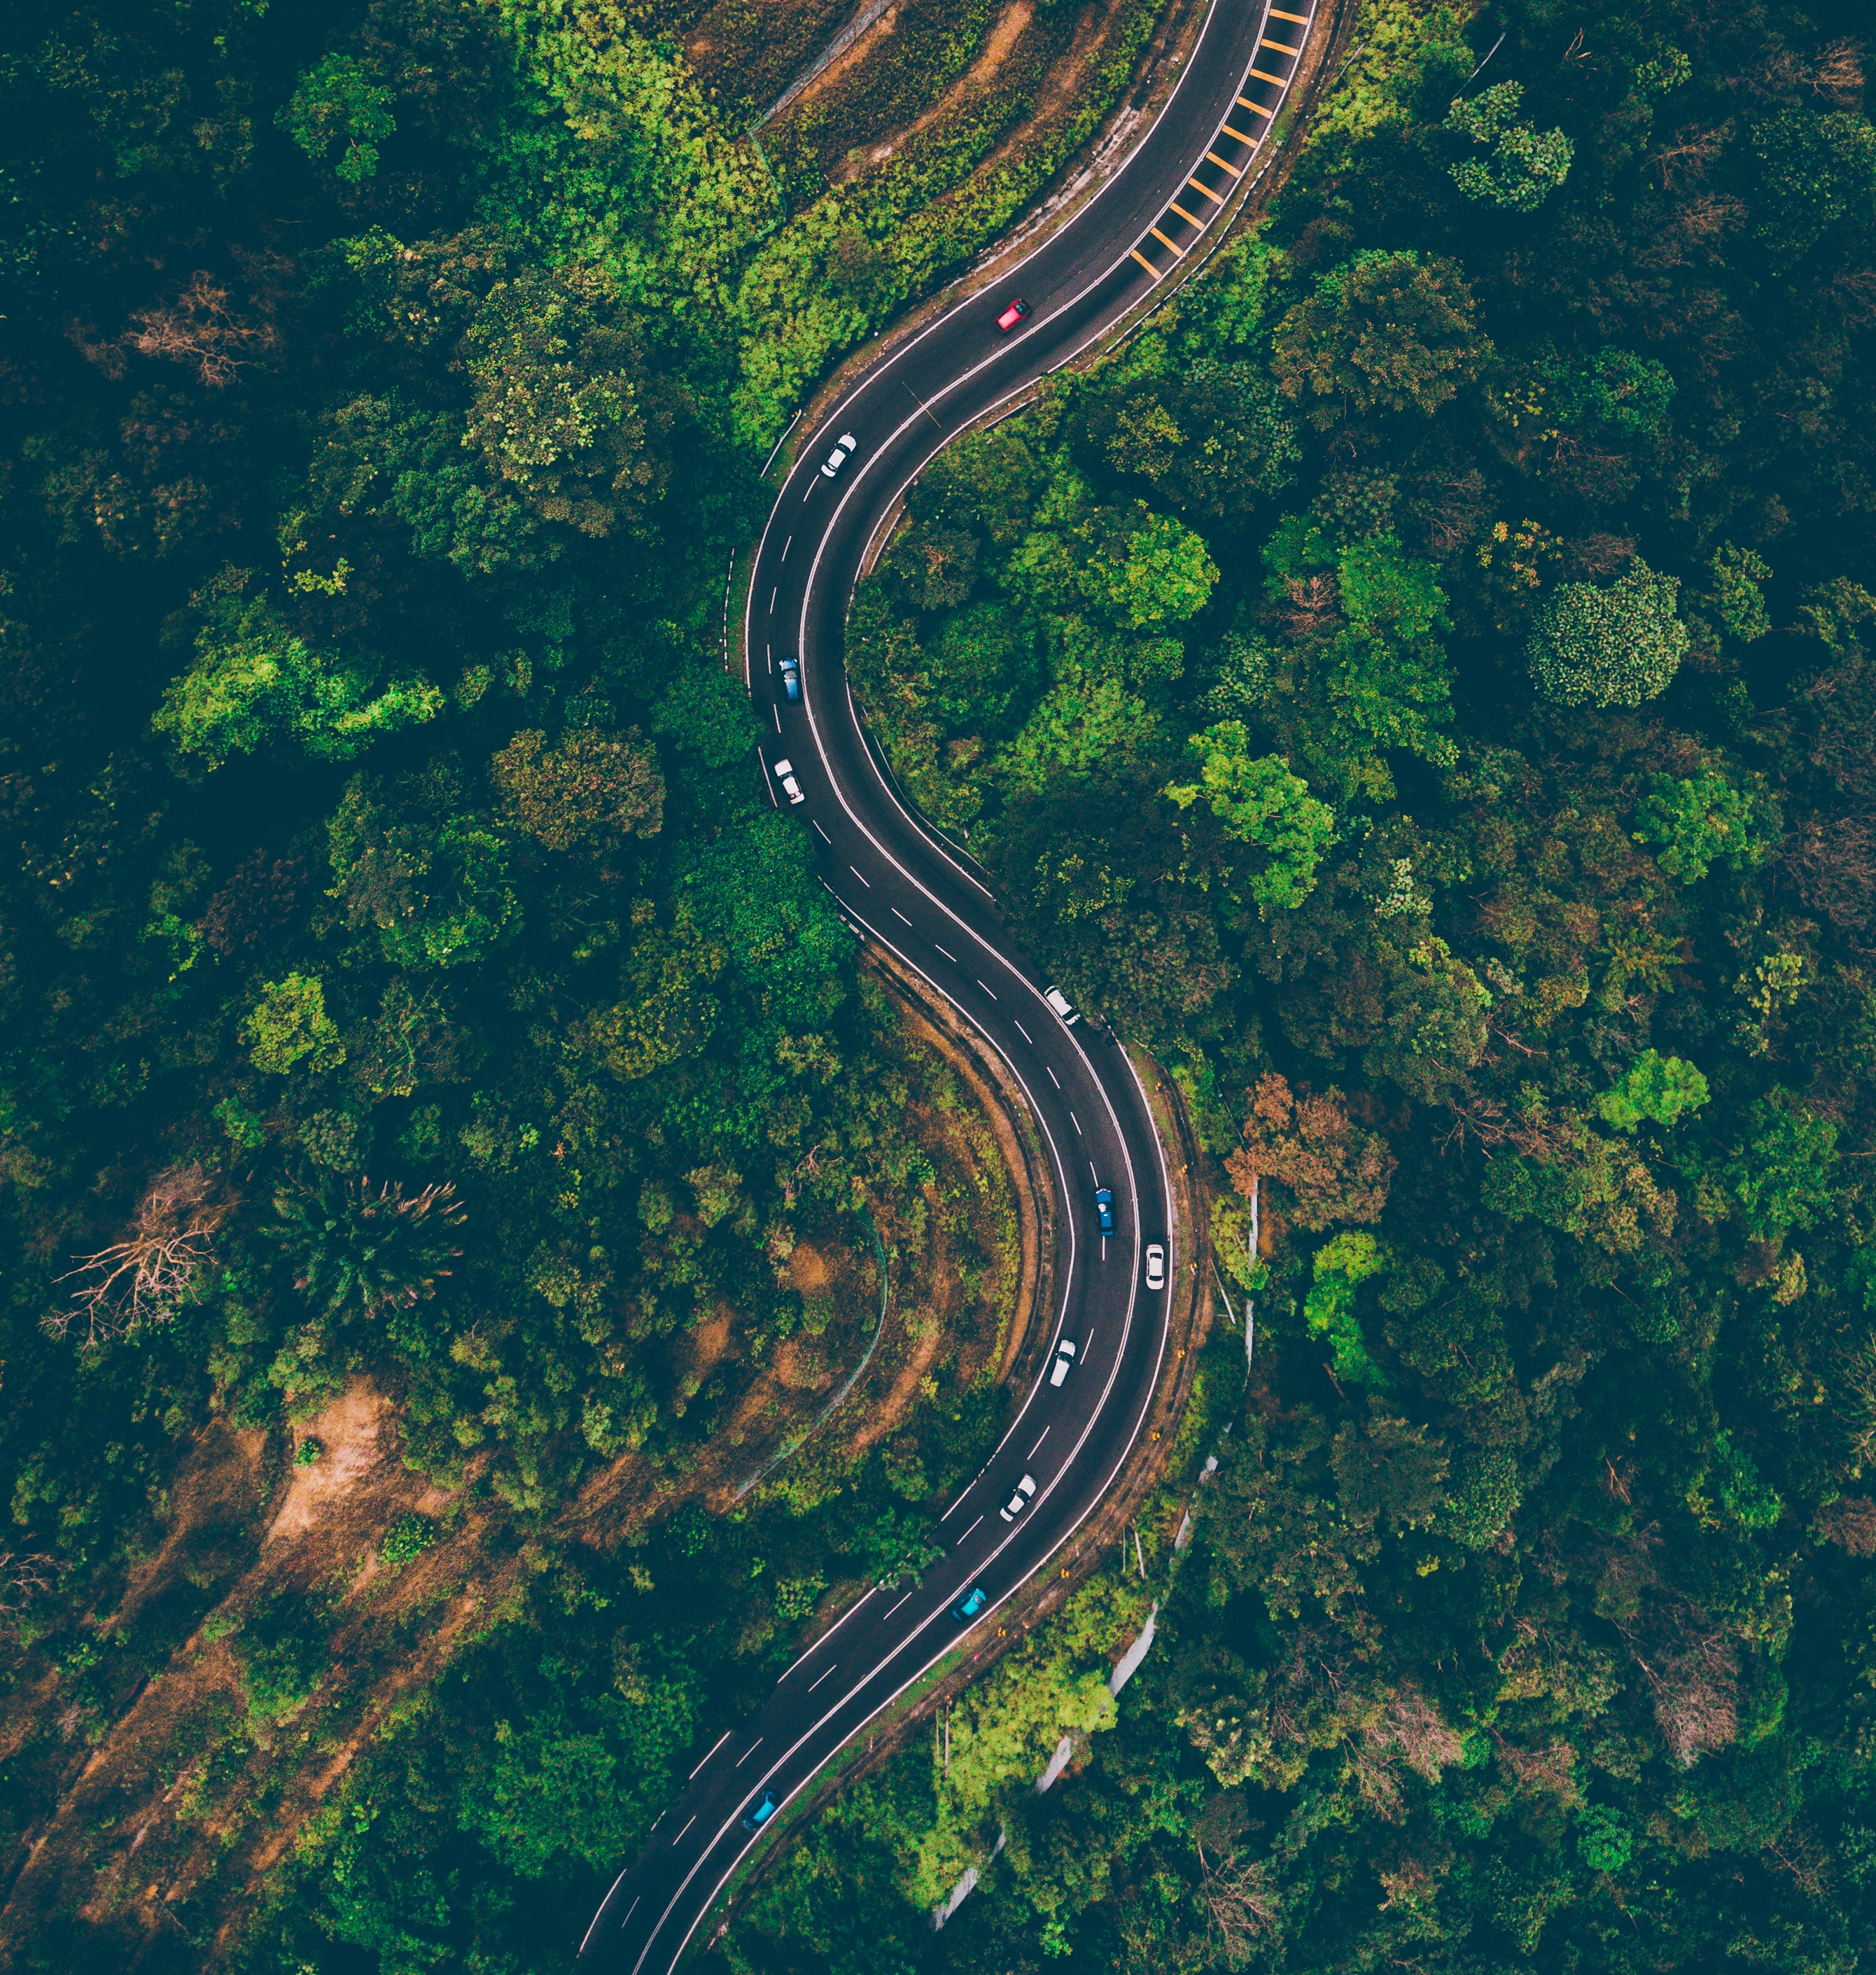 road, sinuous, malaysia, view from above, nature, trees, winding, batang kali wallpaper for mobile